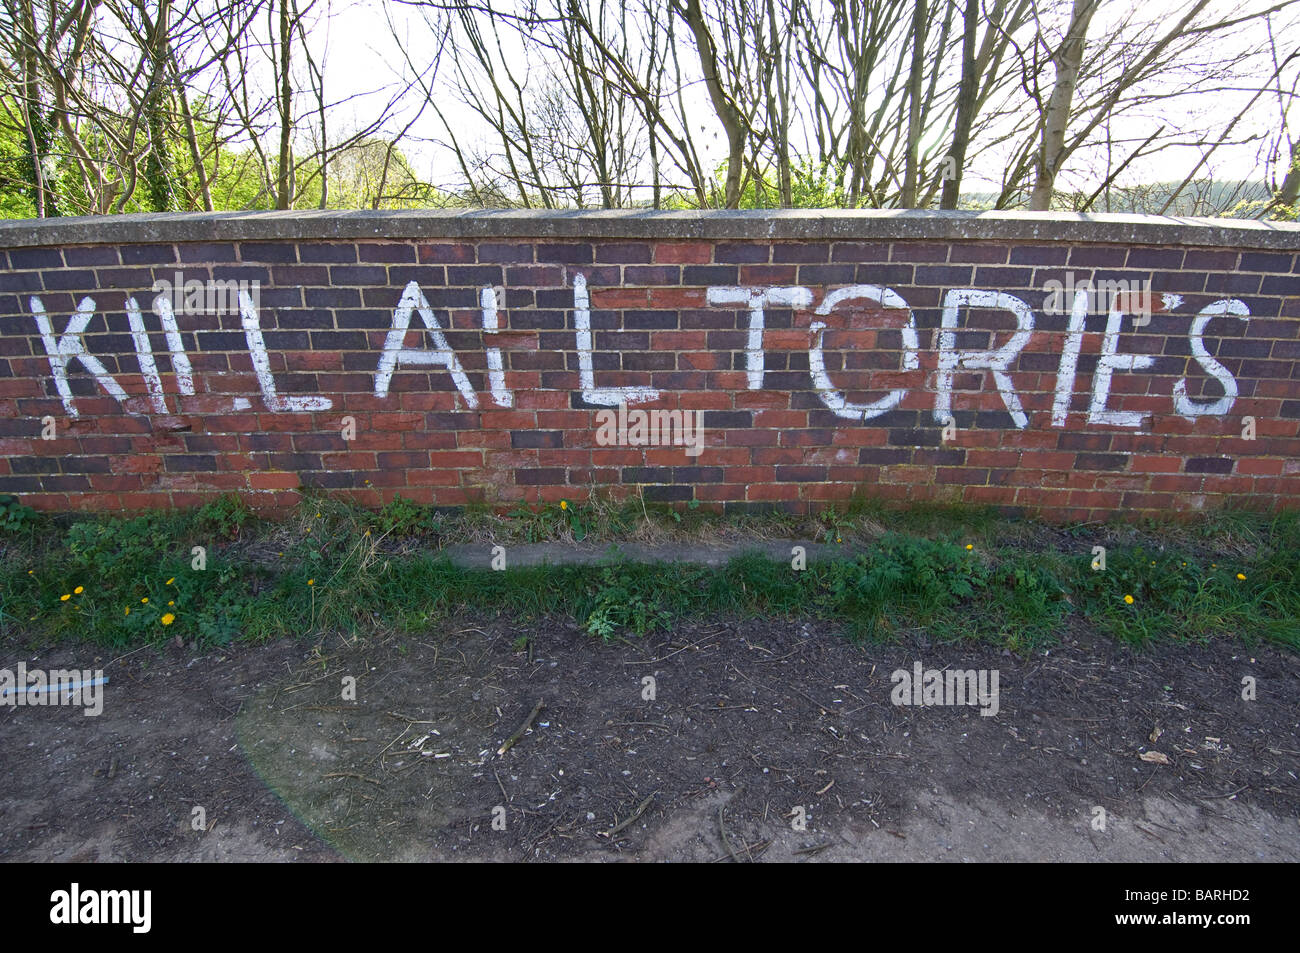 Kill all Tories, a political message painted onto a brick wall Stock Photo